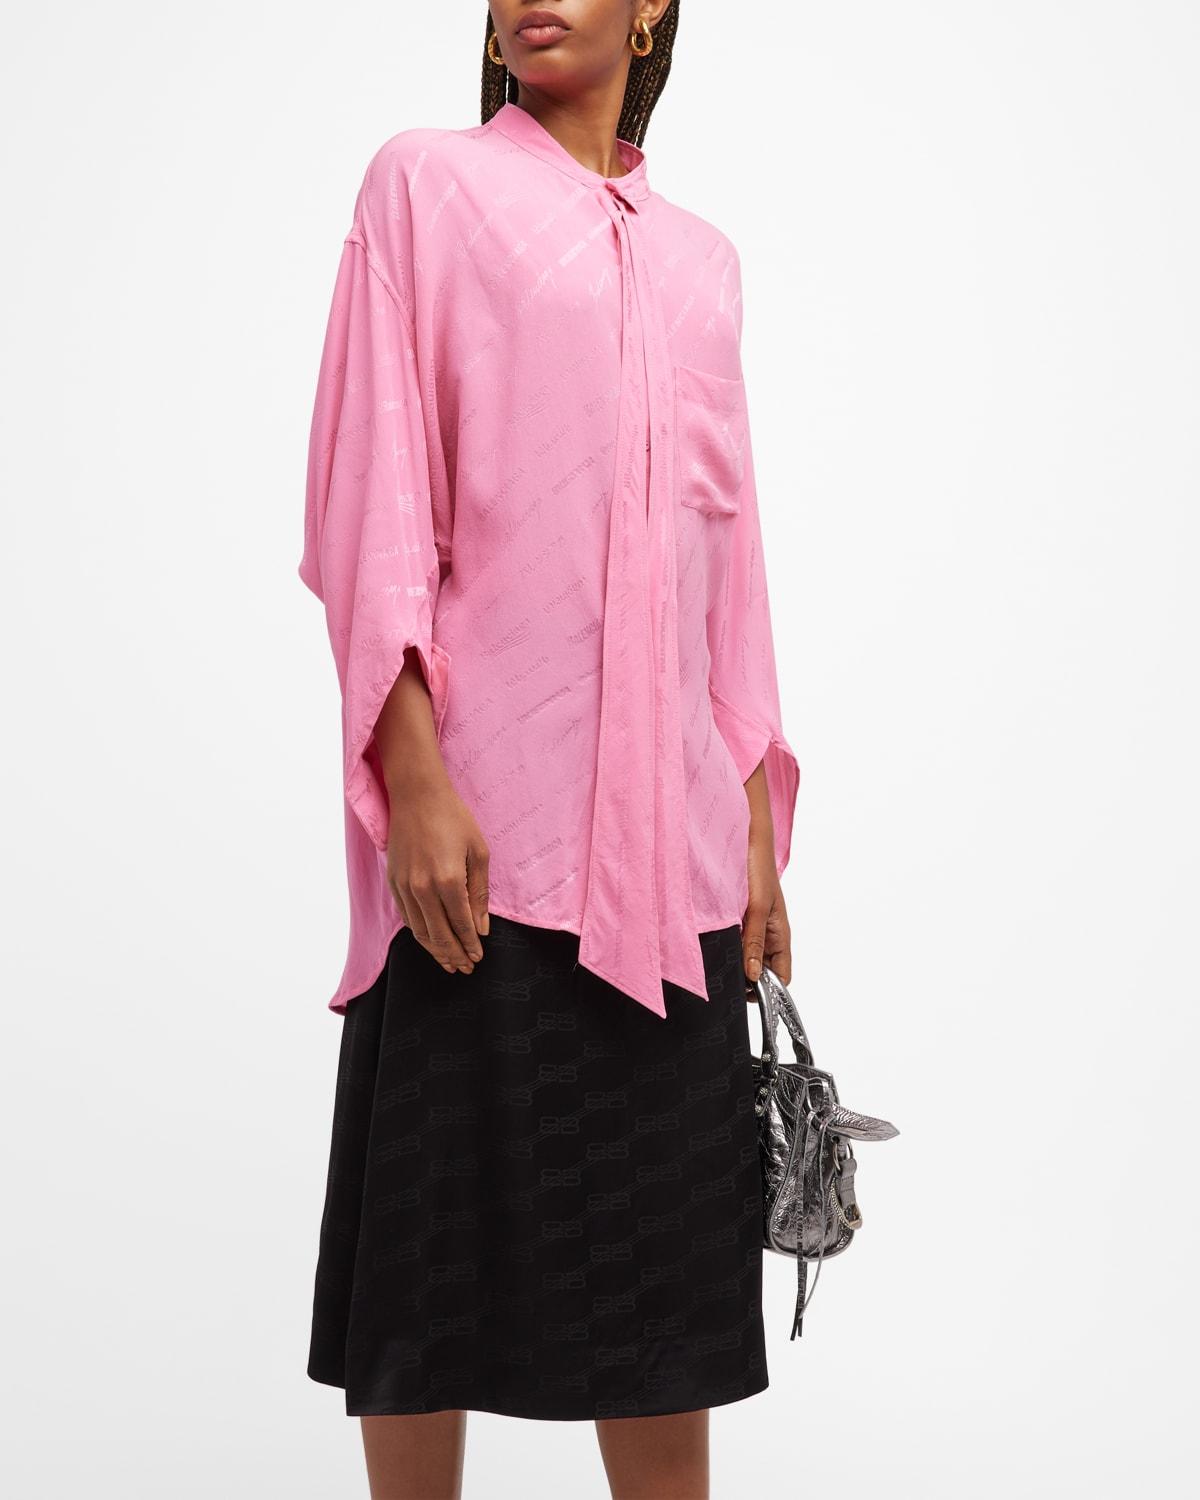 Balenciaga Logomania All Over Swing Twisted Blouse in Pink | Lyst